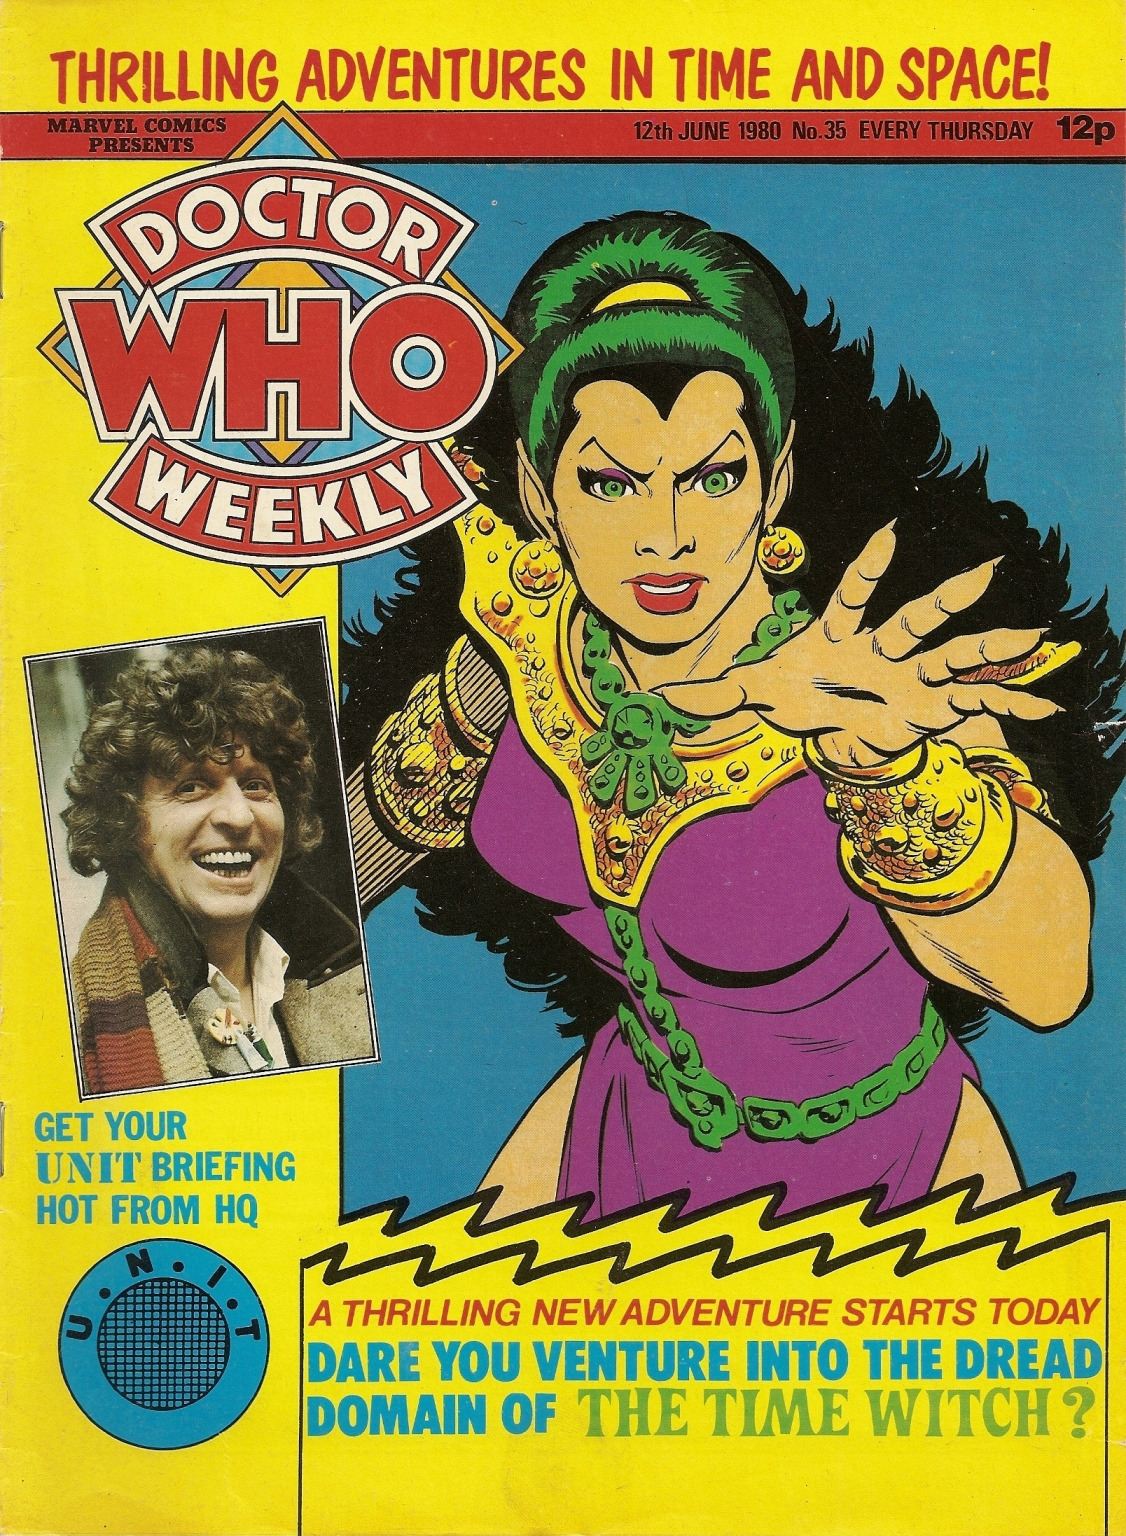 Doctor Who Weekly - Issue 35 - 12th June 1980